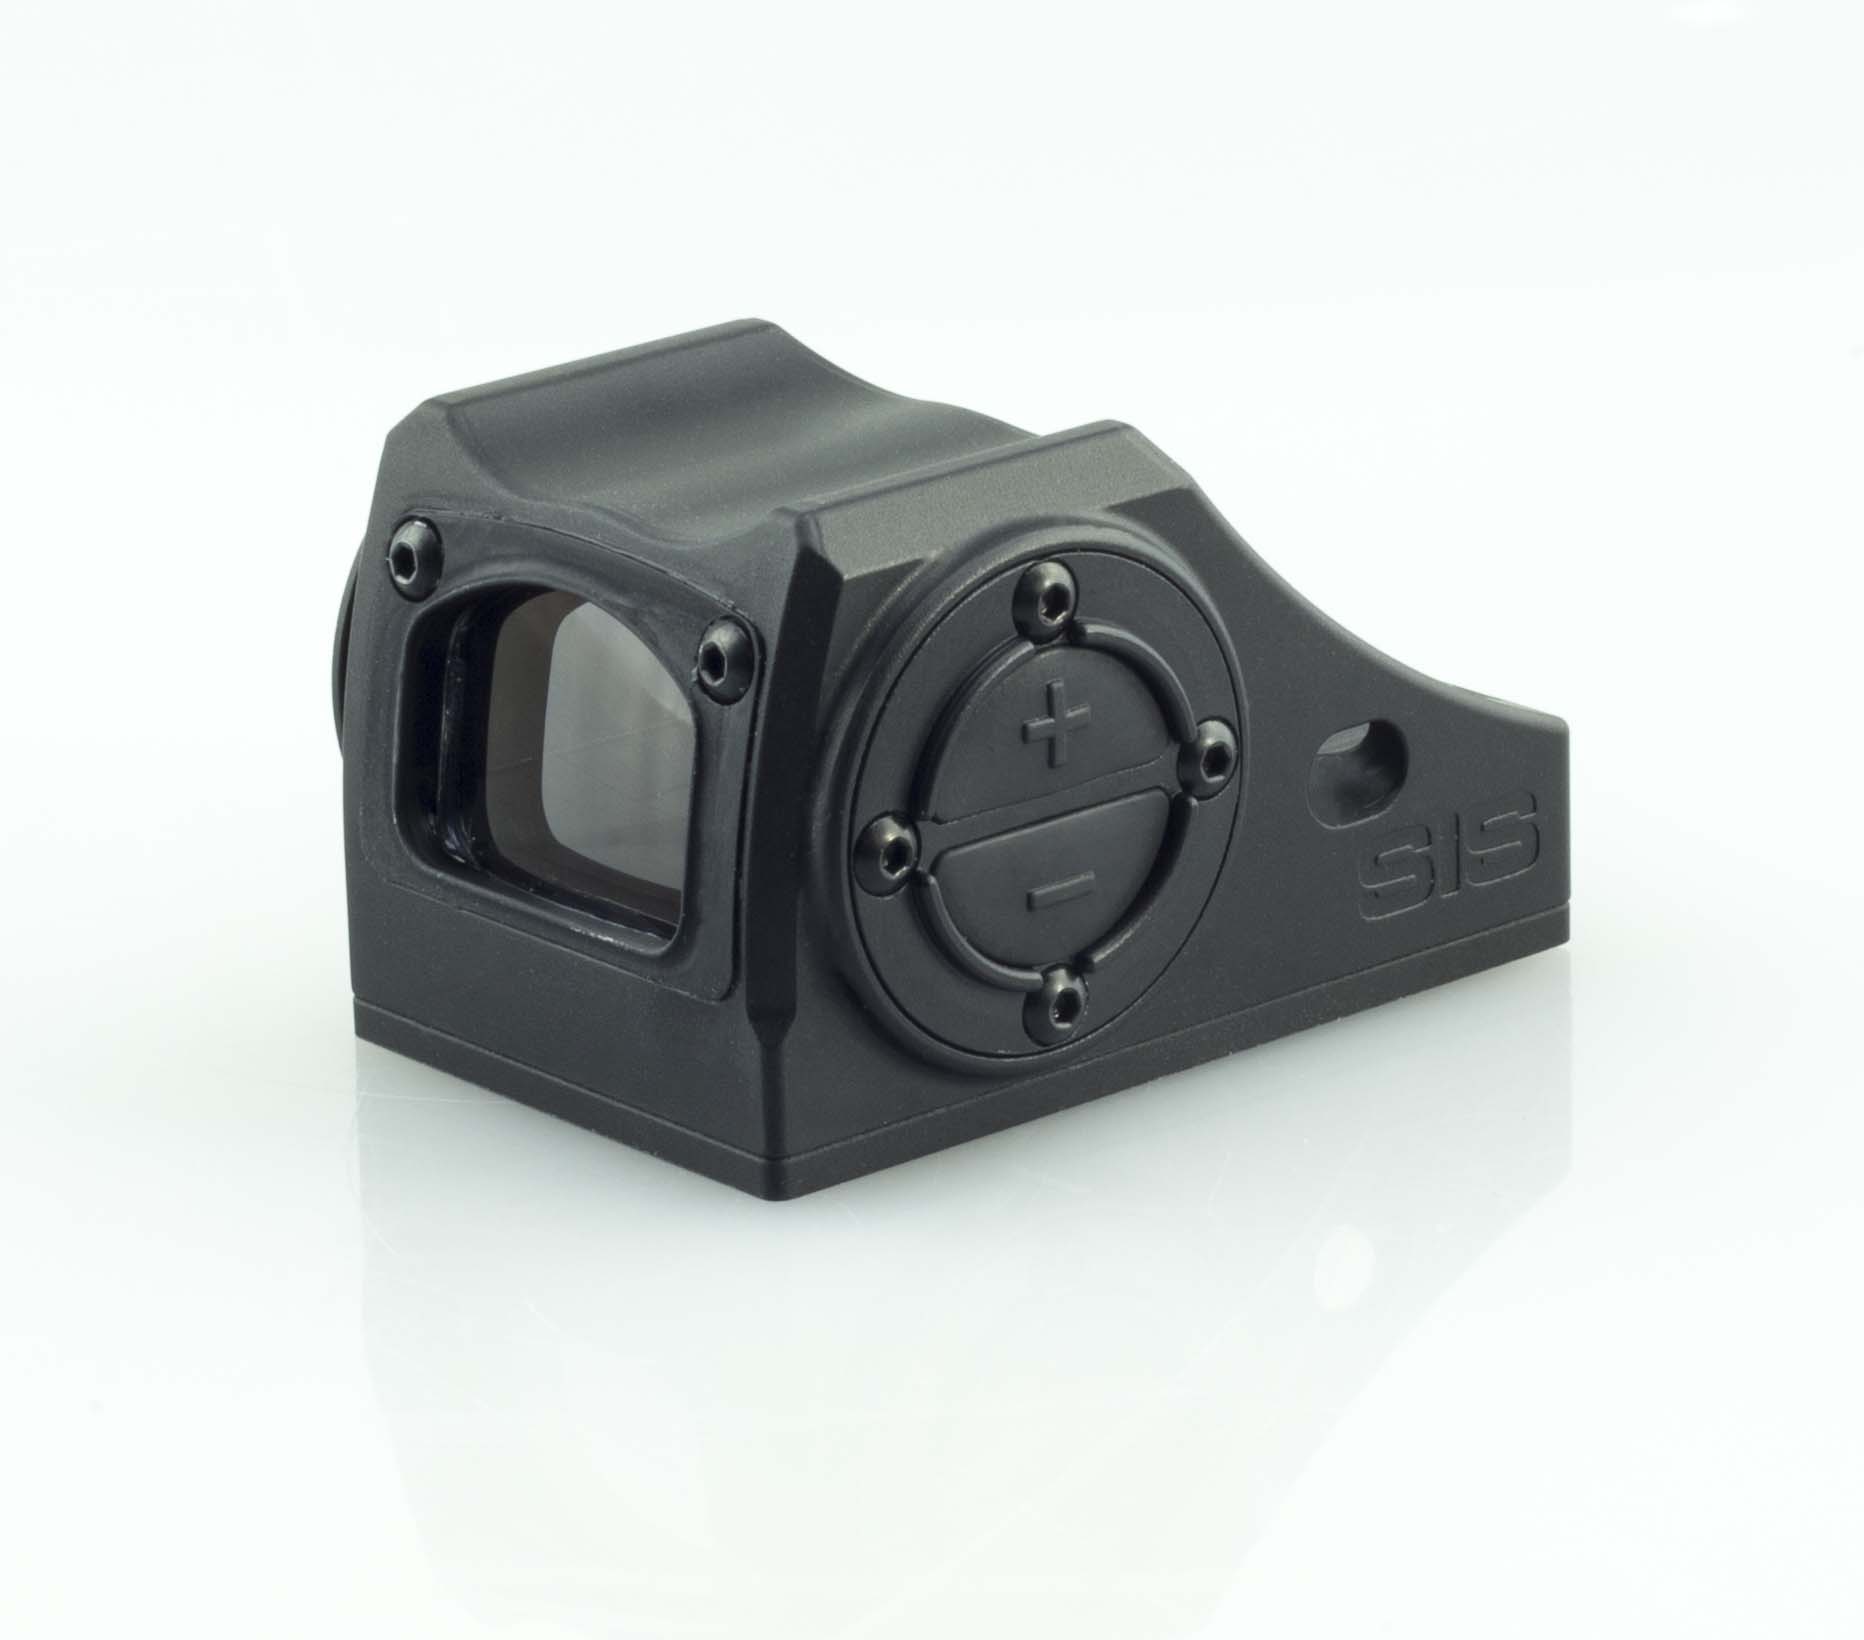 Sis Switchable Interface Sight Center Dot Shield Sights